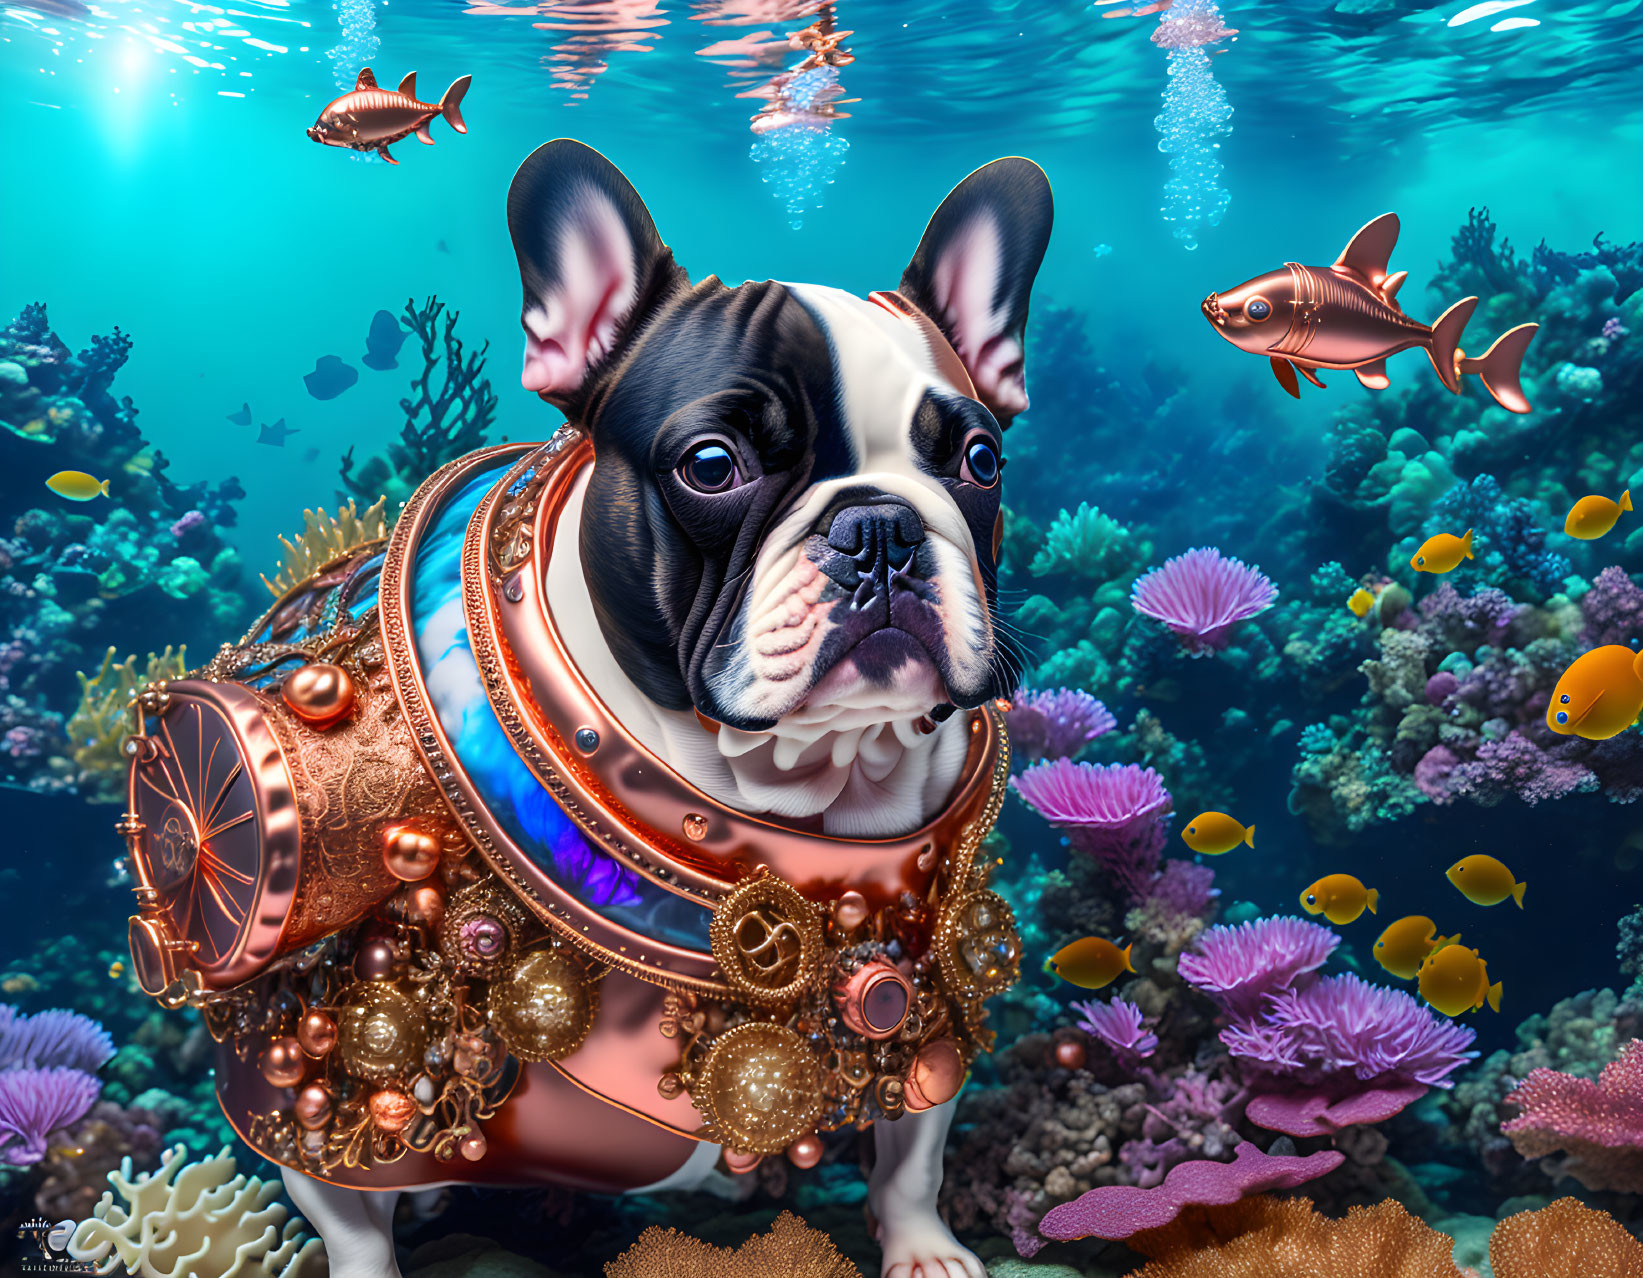 Digital Artwork: French Bulldog in Steampunk Submarine Suit surrounded by Underwater Coral &